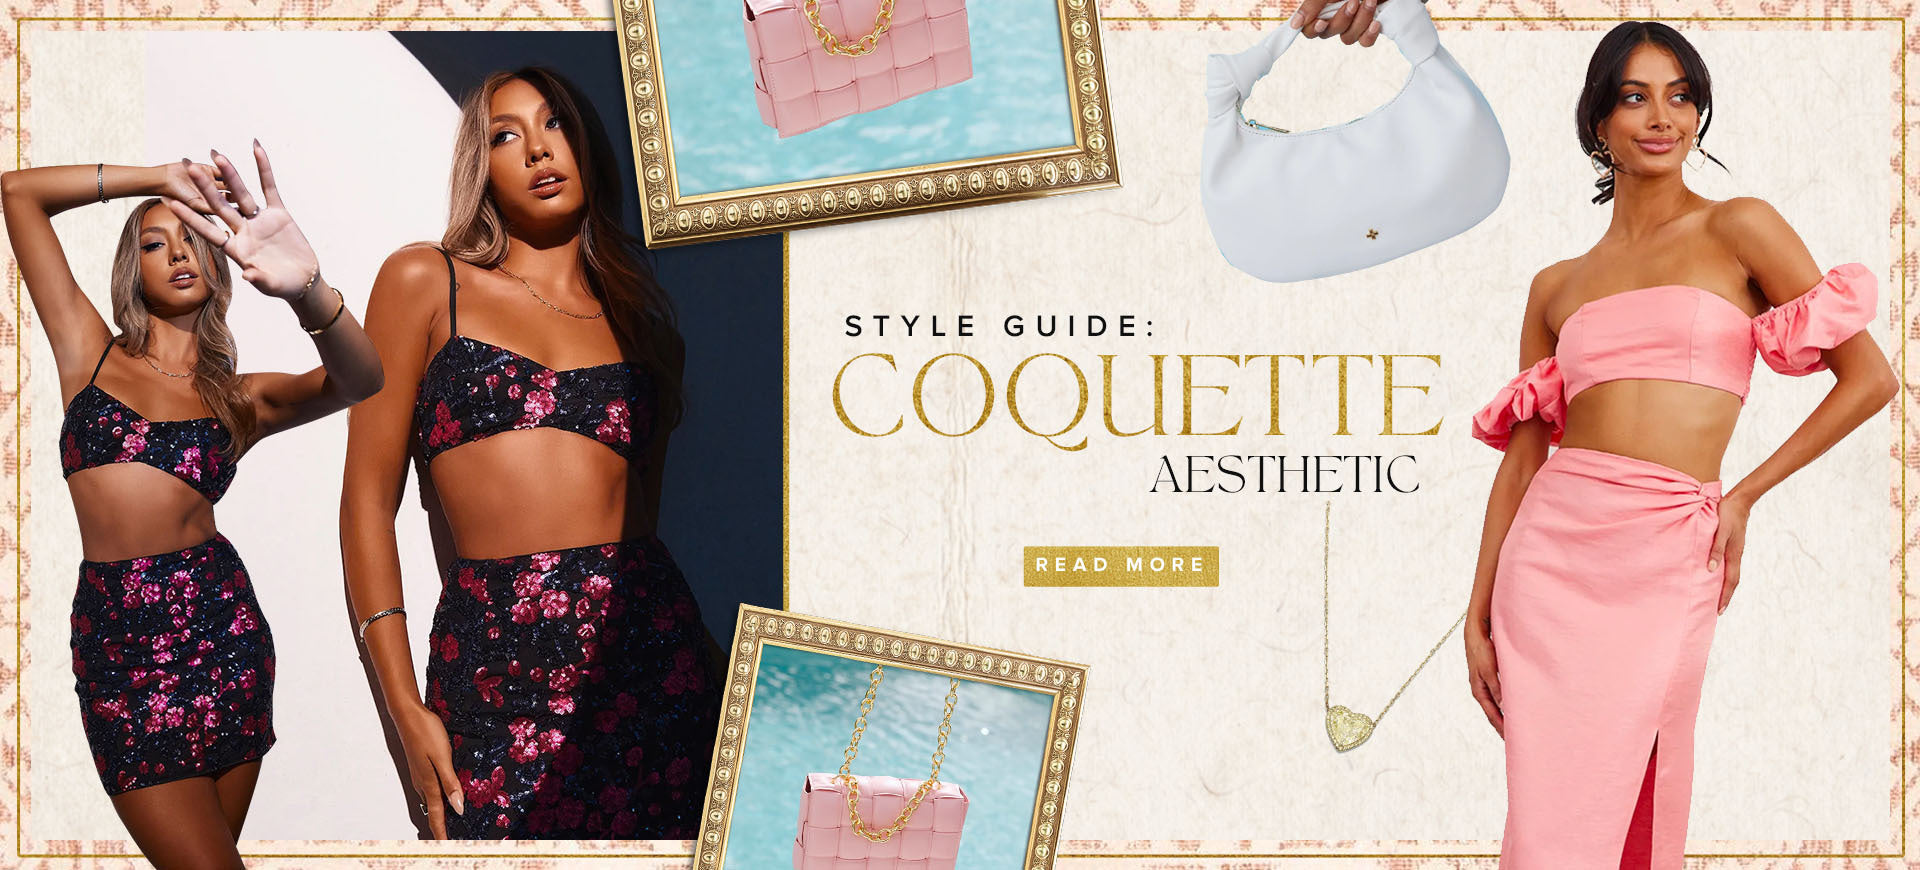 Coquette aesthetic Outfit